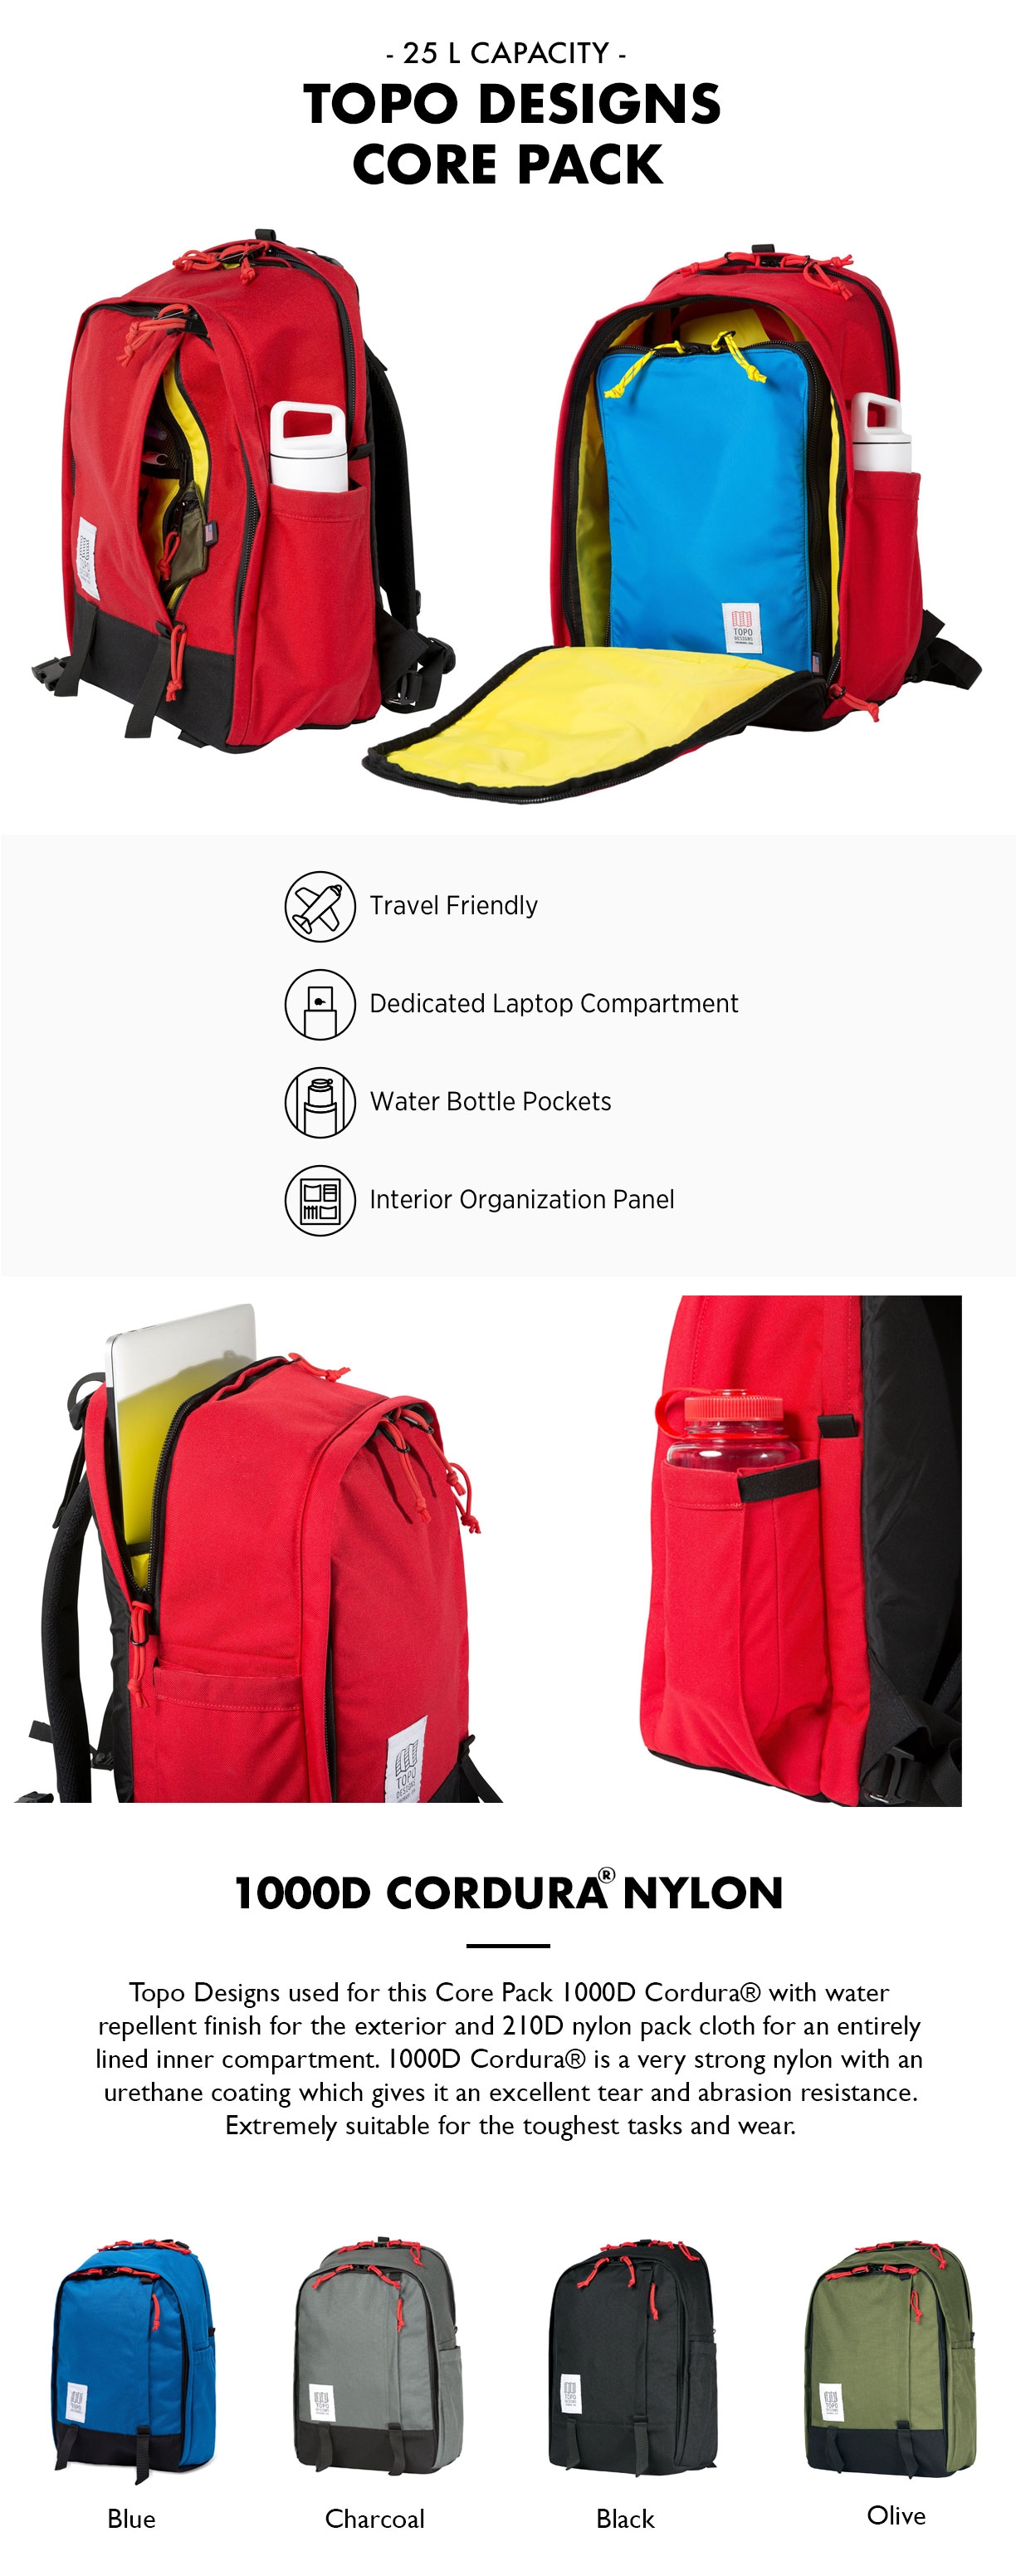 Topo Designs Core Pack product information 